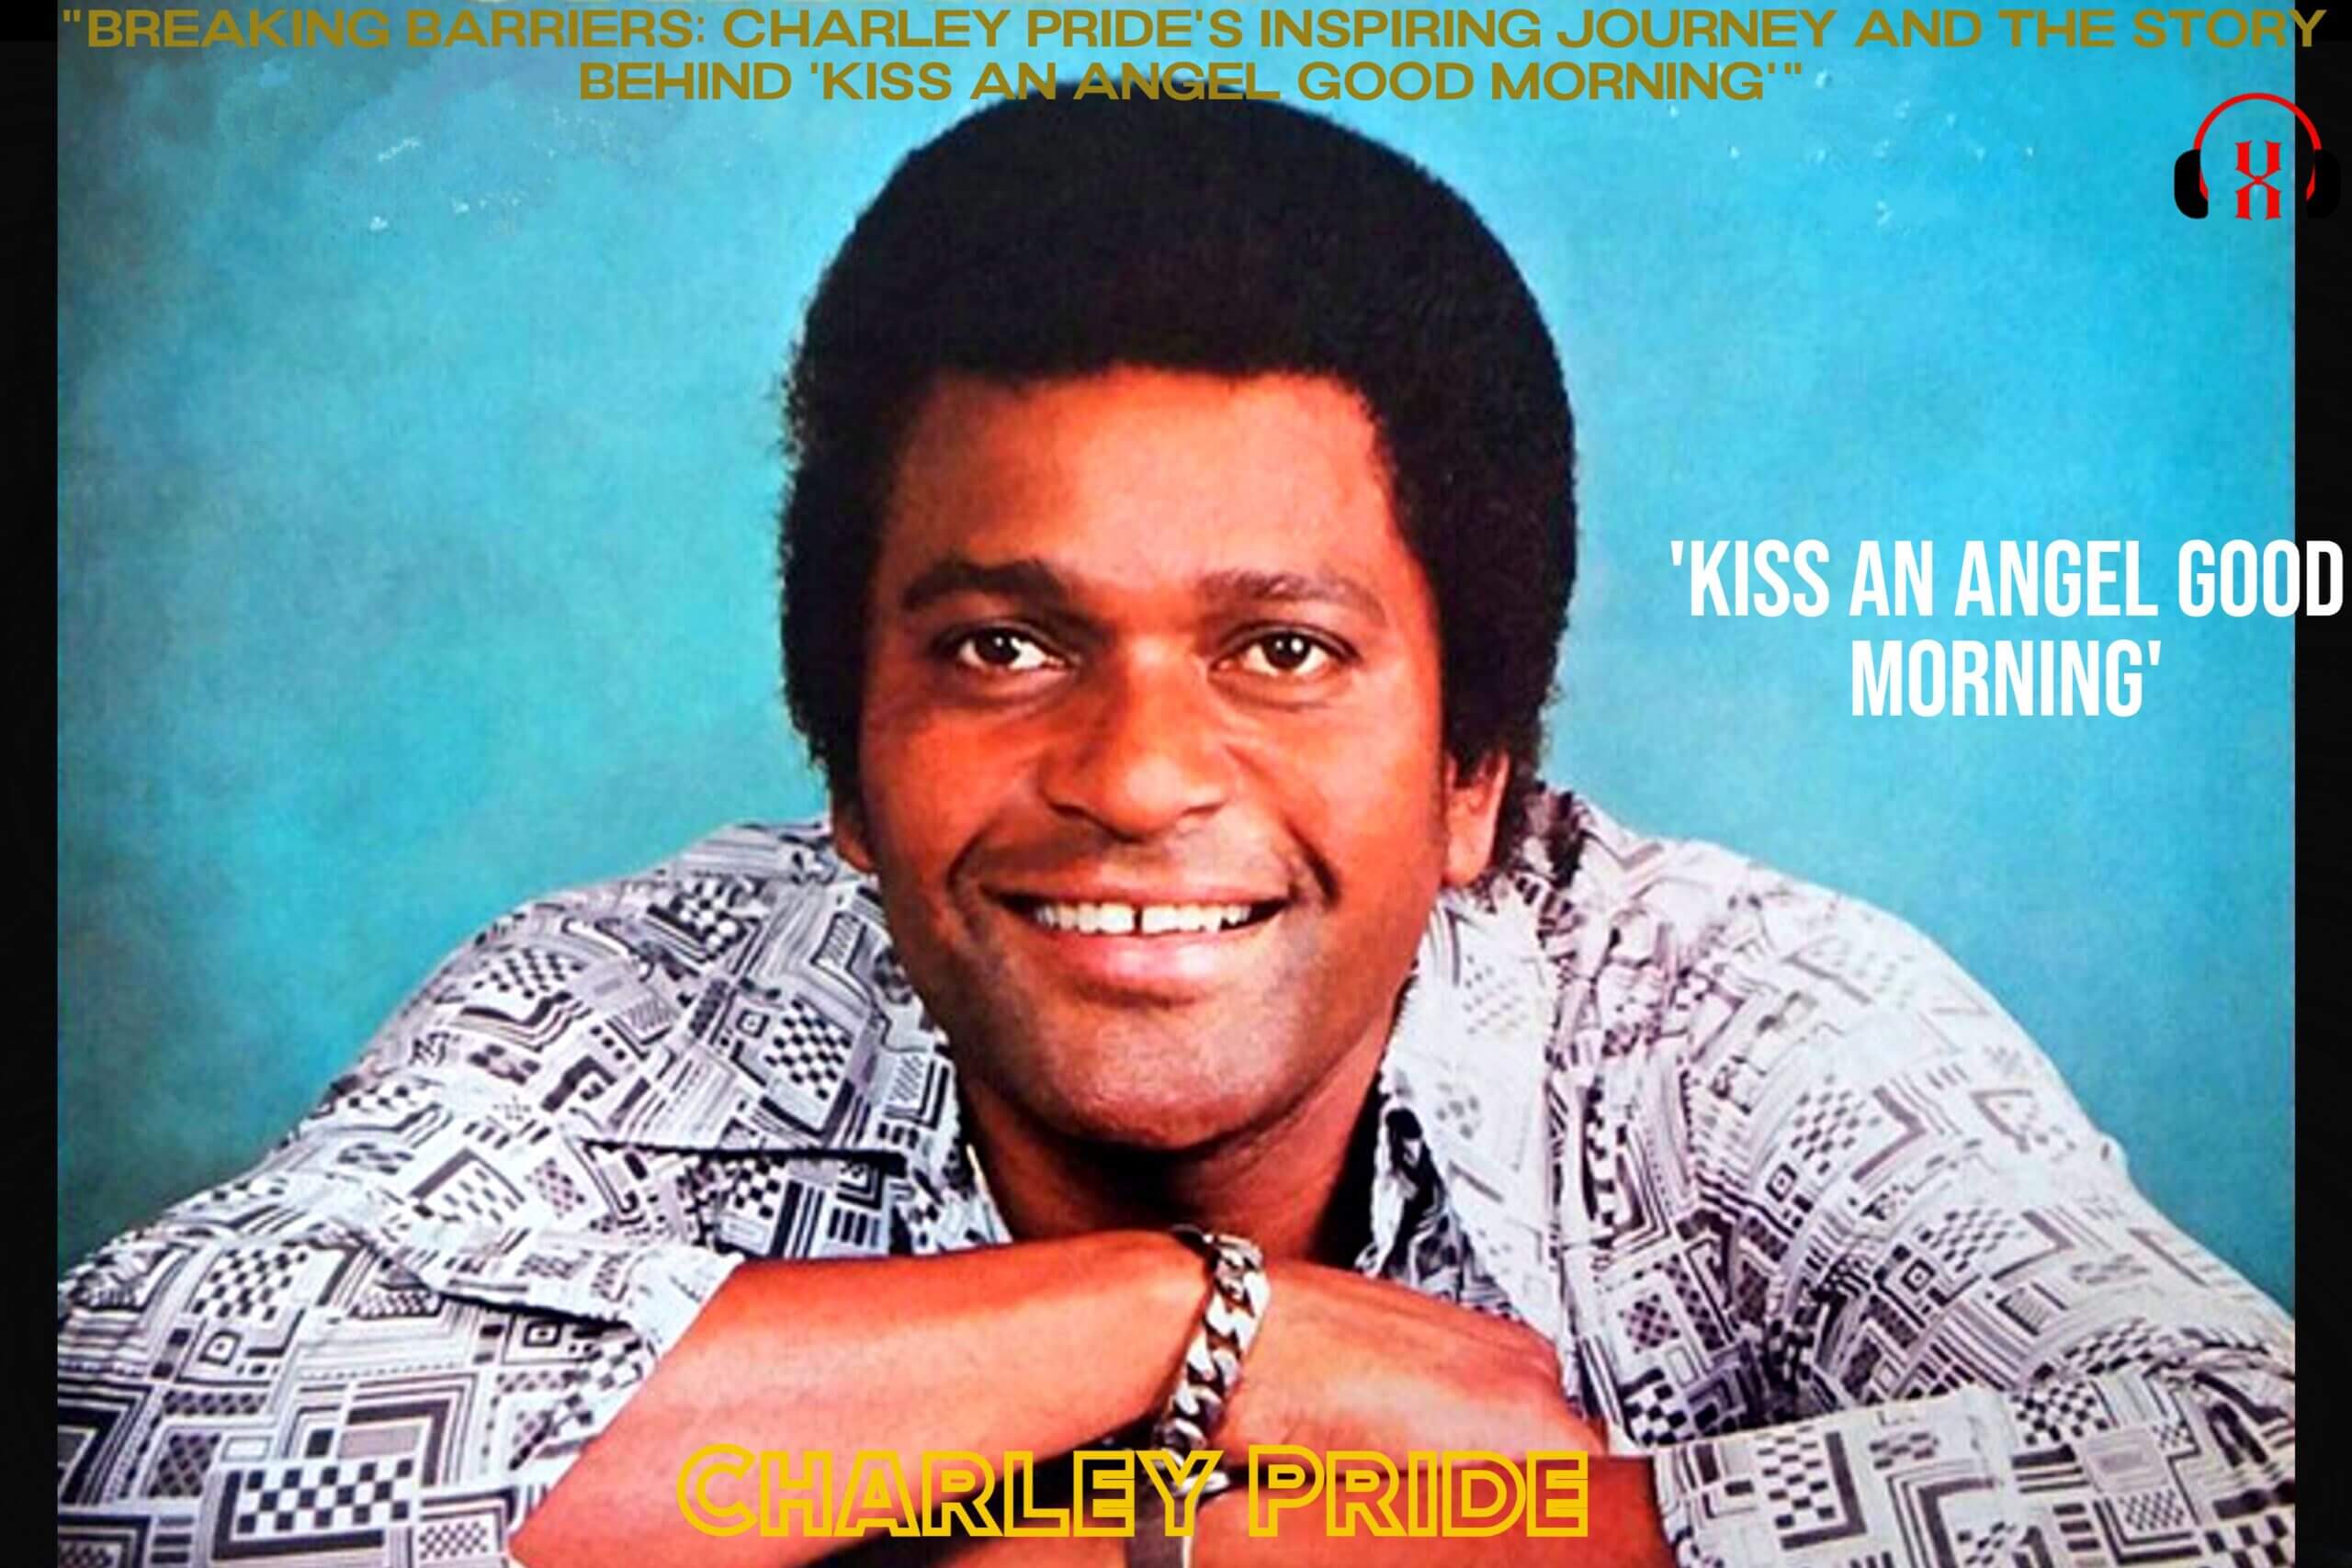 “Breaking Barriers: Charley Pride’s Inspiring Journey and the Story Behind ‘Kiss An Angel Good Morning'”